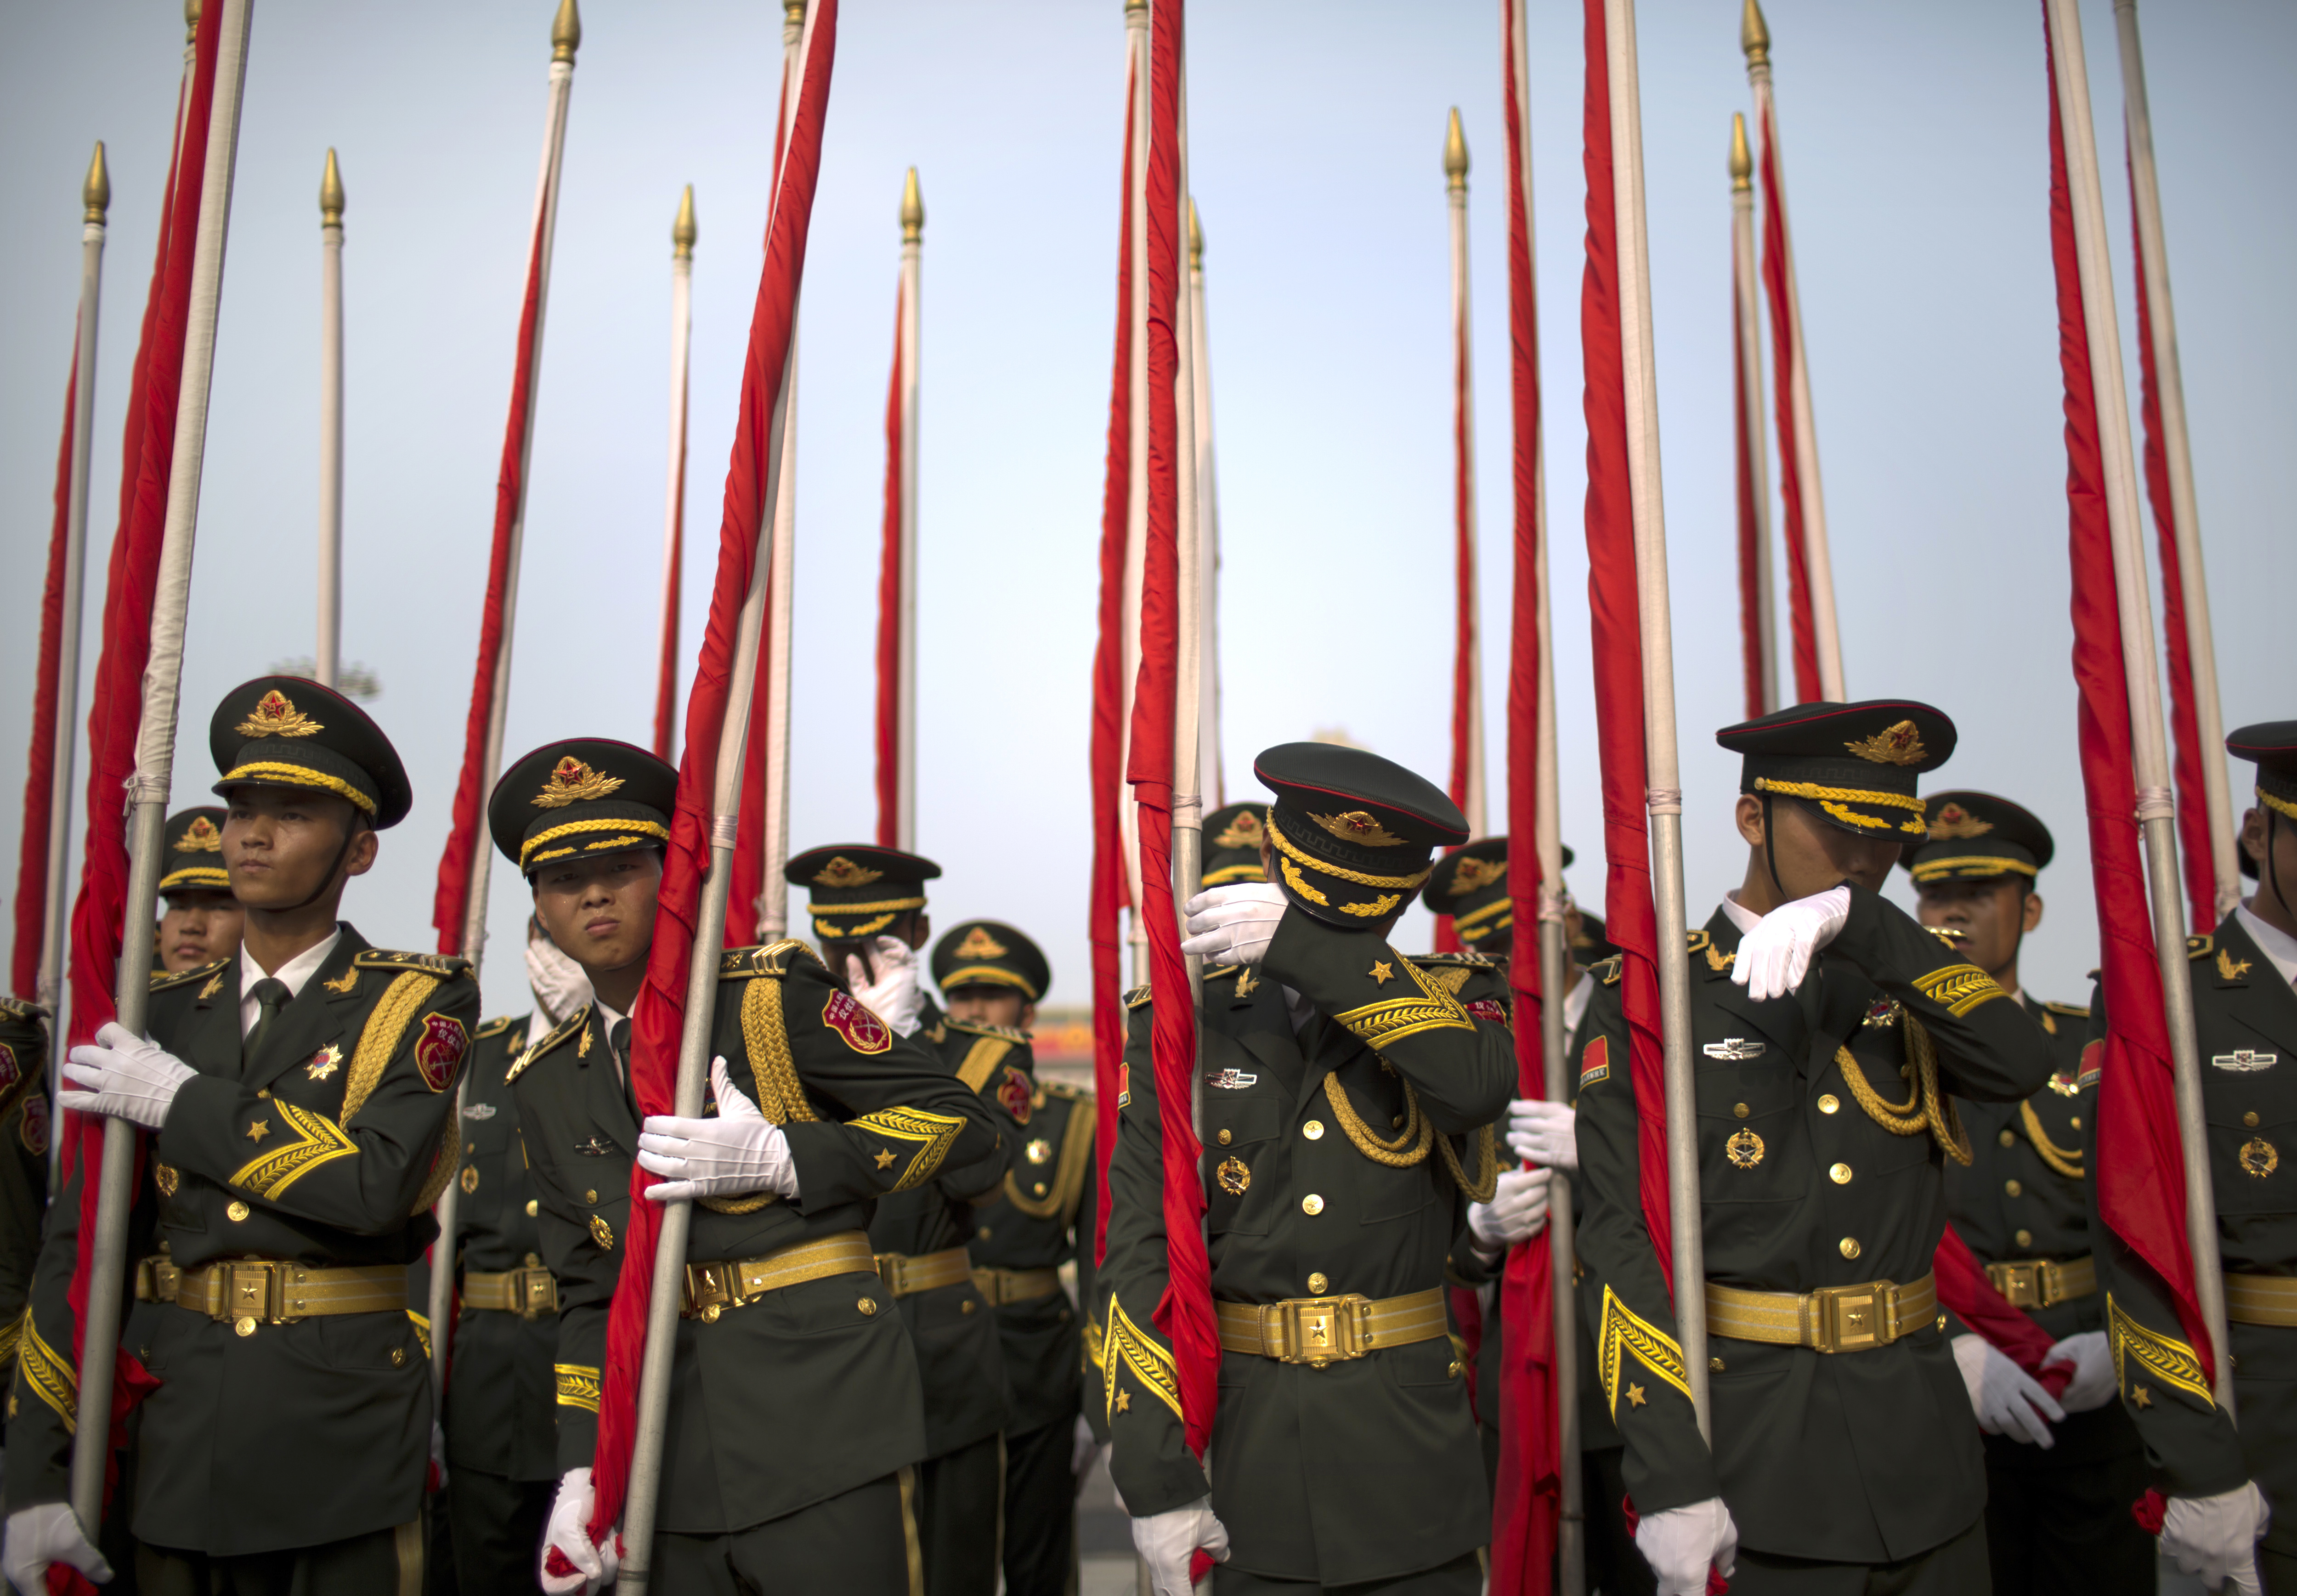 Members of a Chinese honor guard wipe sweat off of their faces before a welcome ceremony for Palestinian President Mahmoud Abbas at the Great Hall of the People in Beijing, Tuesday, July 18, 2017. (AP Photo/Mark Schiefelbein)